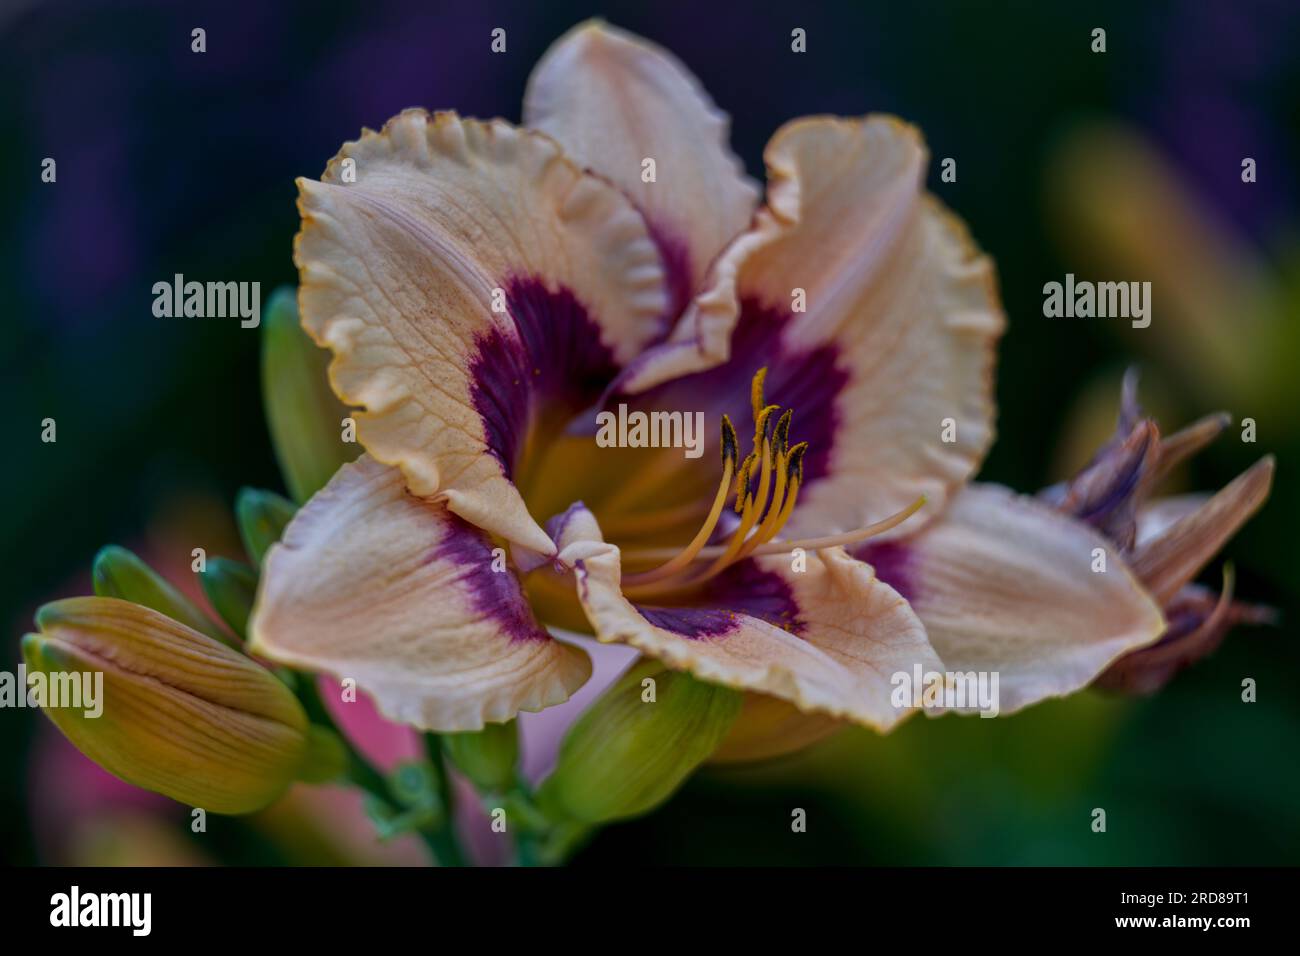 Lush,colorful vivid day lily flower close up Stock Photo